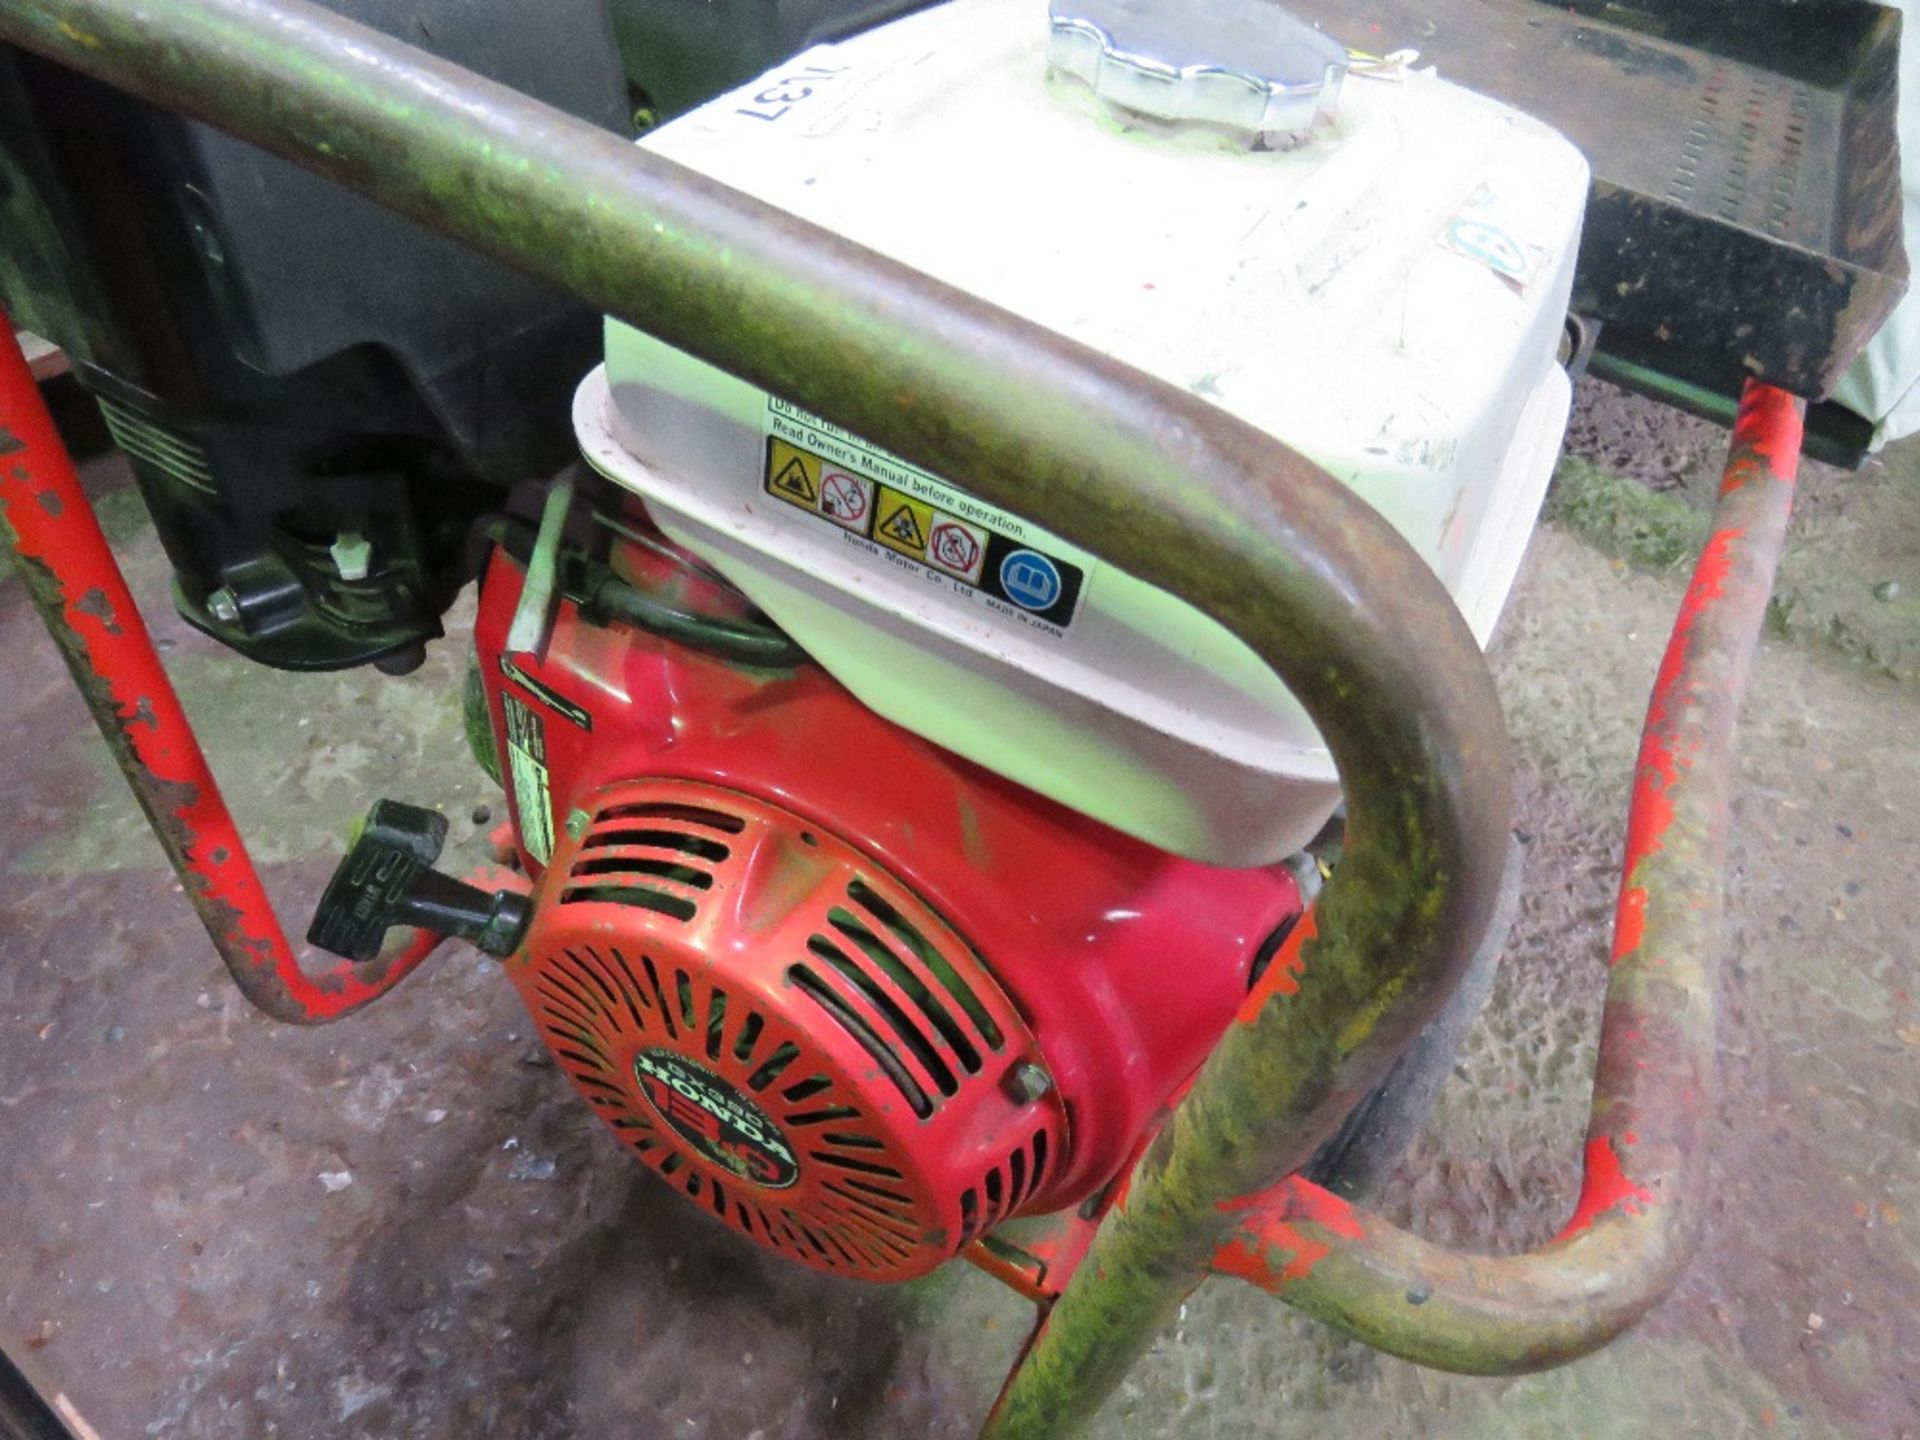 HONDA ENGINED WELDER GENERATOR. WHNE TESTED WAS SEEN TO RUN, OUTPUT UNTESTED. - Image 3 of 4